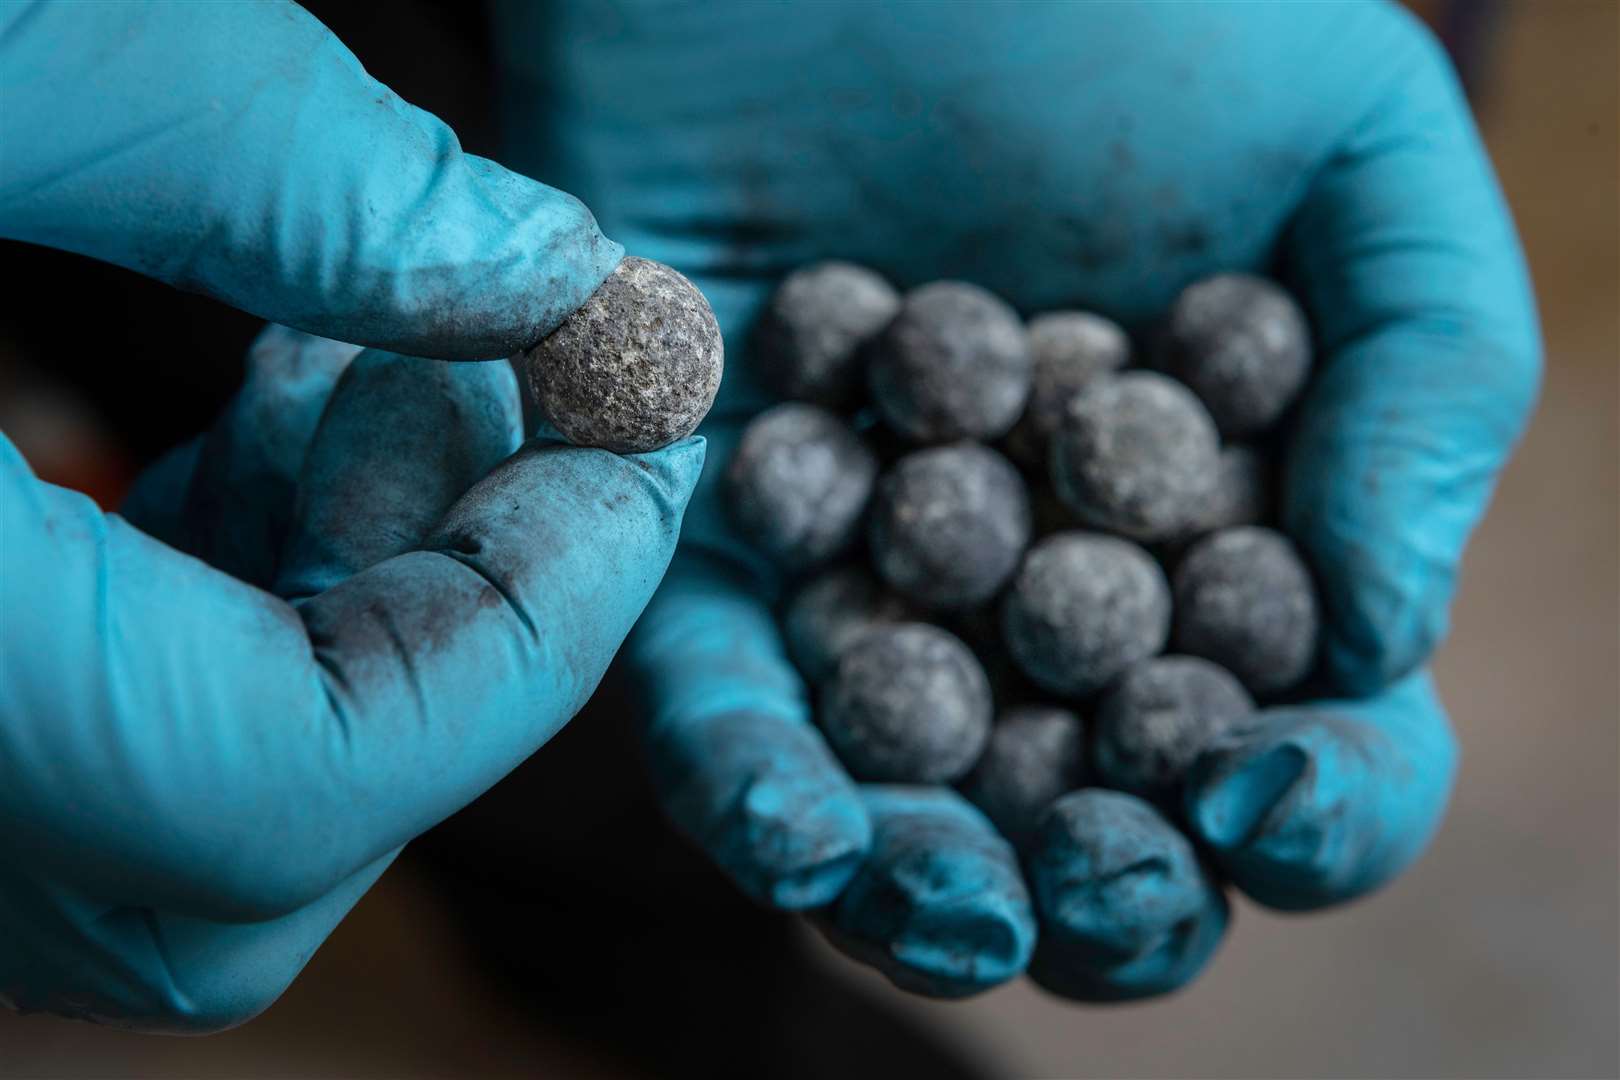 Volunteers helping to conserve items recovered from the wreck of HMS Invincible in Poole, Dorset – including balls of lead shot. Picture: Christopher Ison/National Museum of the Royal Navy